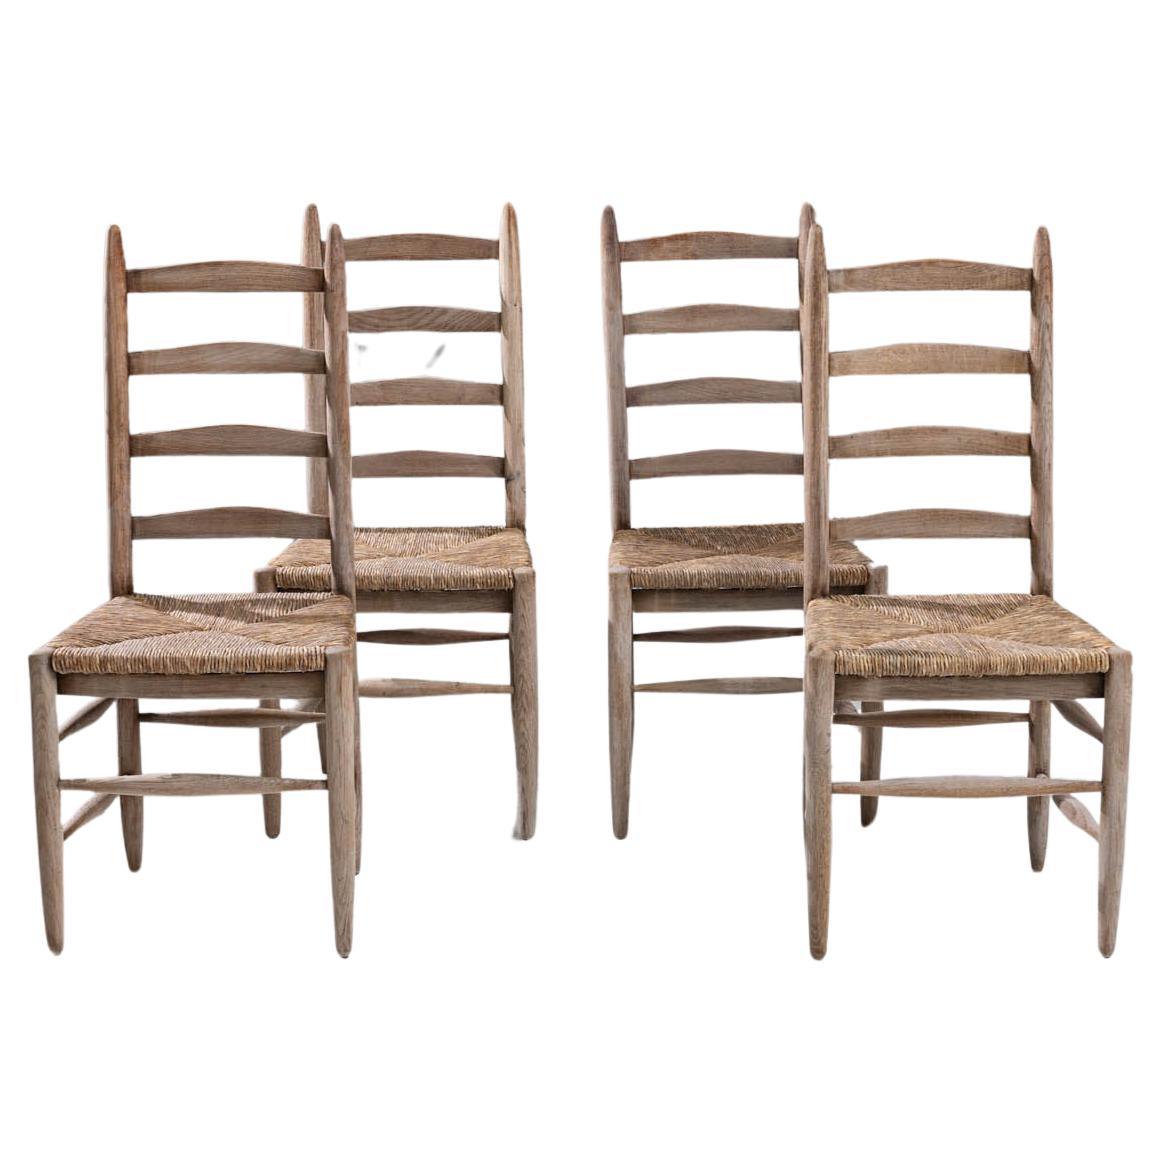 20th Century French Bleached Oak Dining Chairs, Set of 4